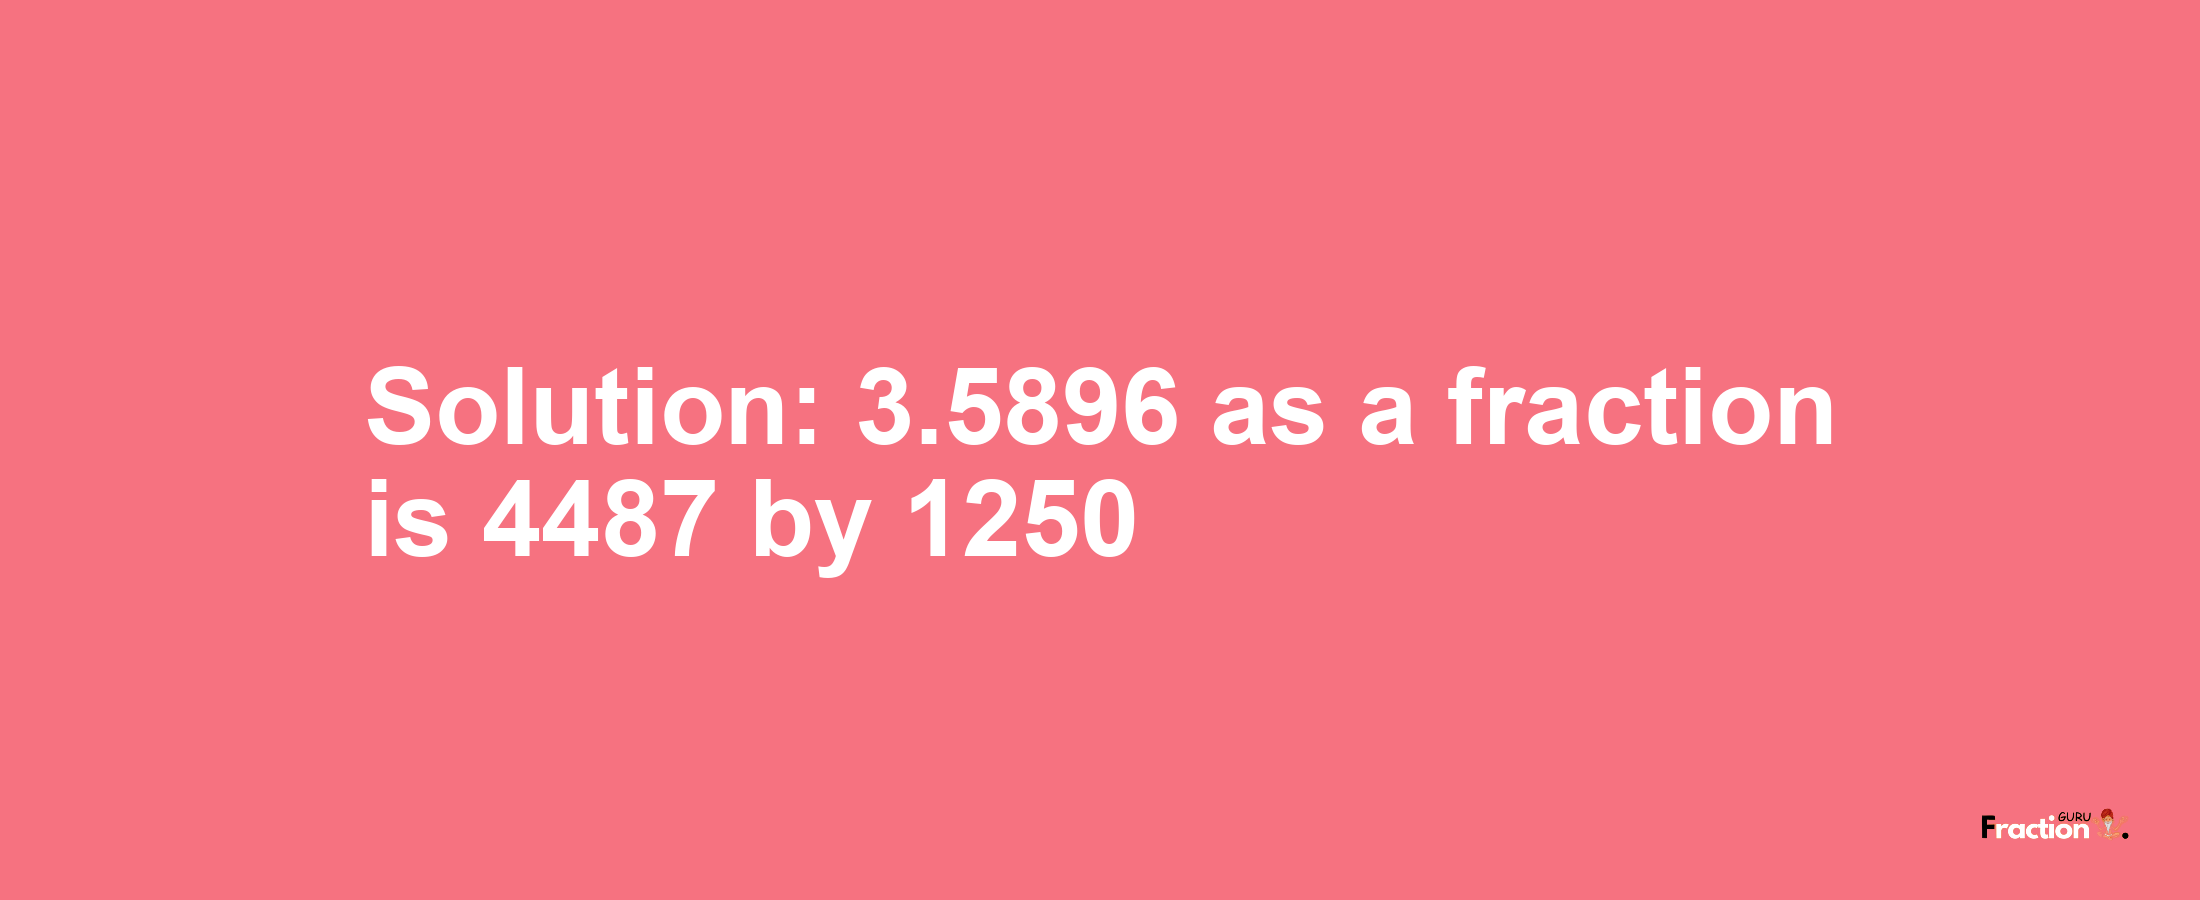 Solution:3.5896 as a fraction is 4487/1250